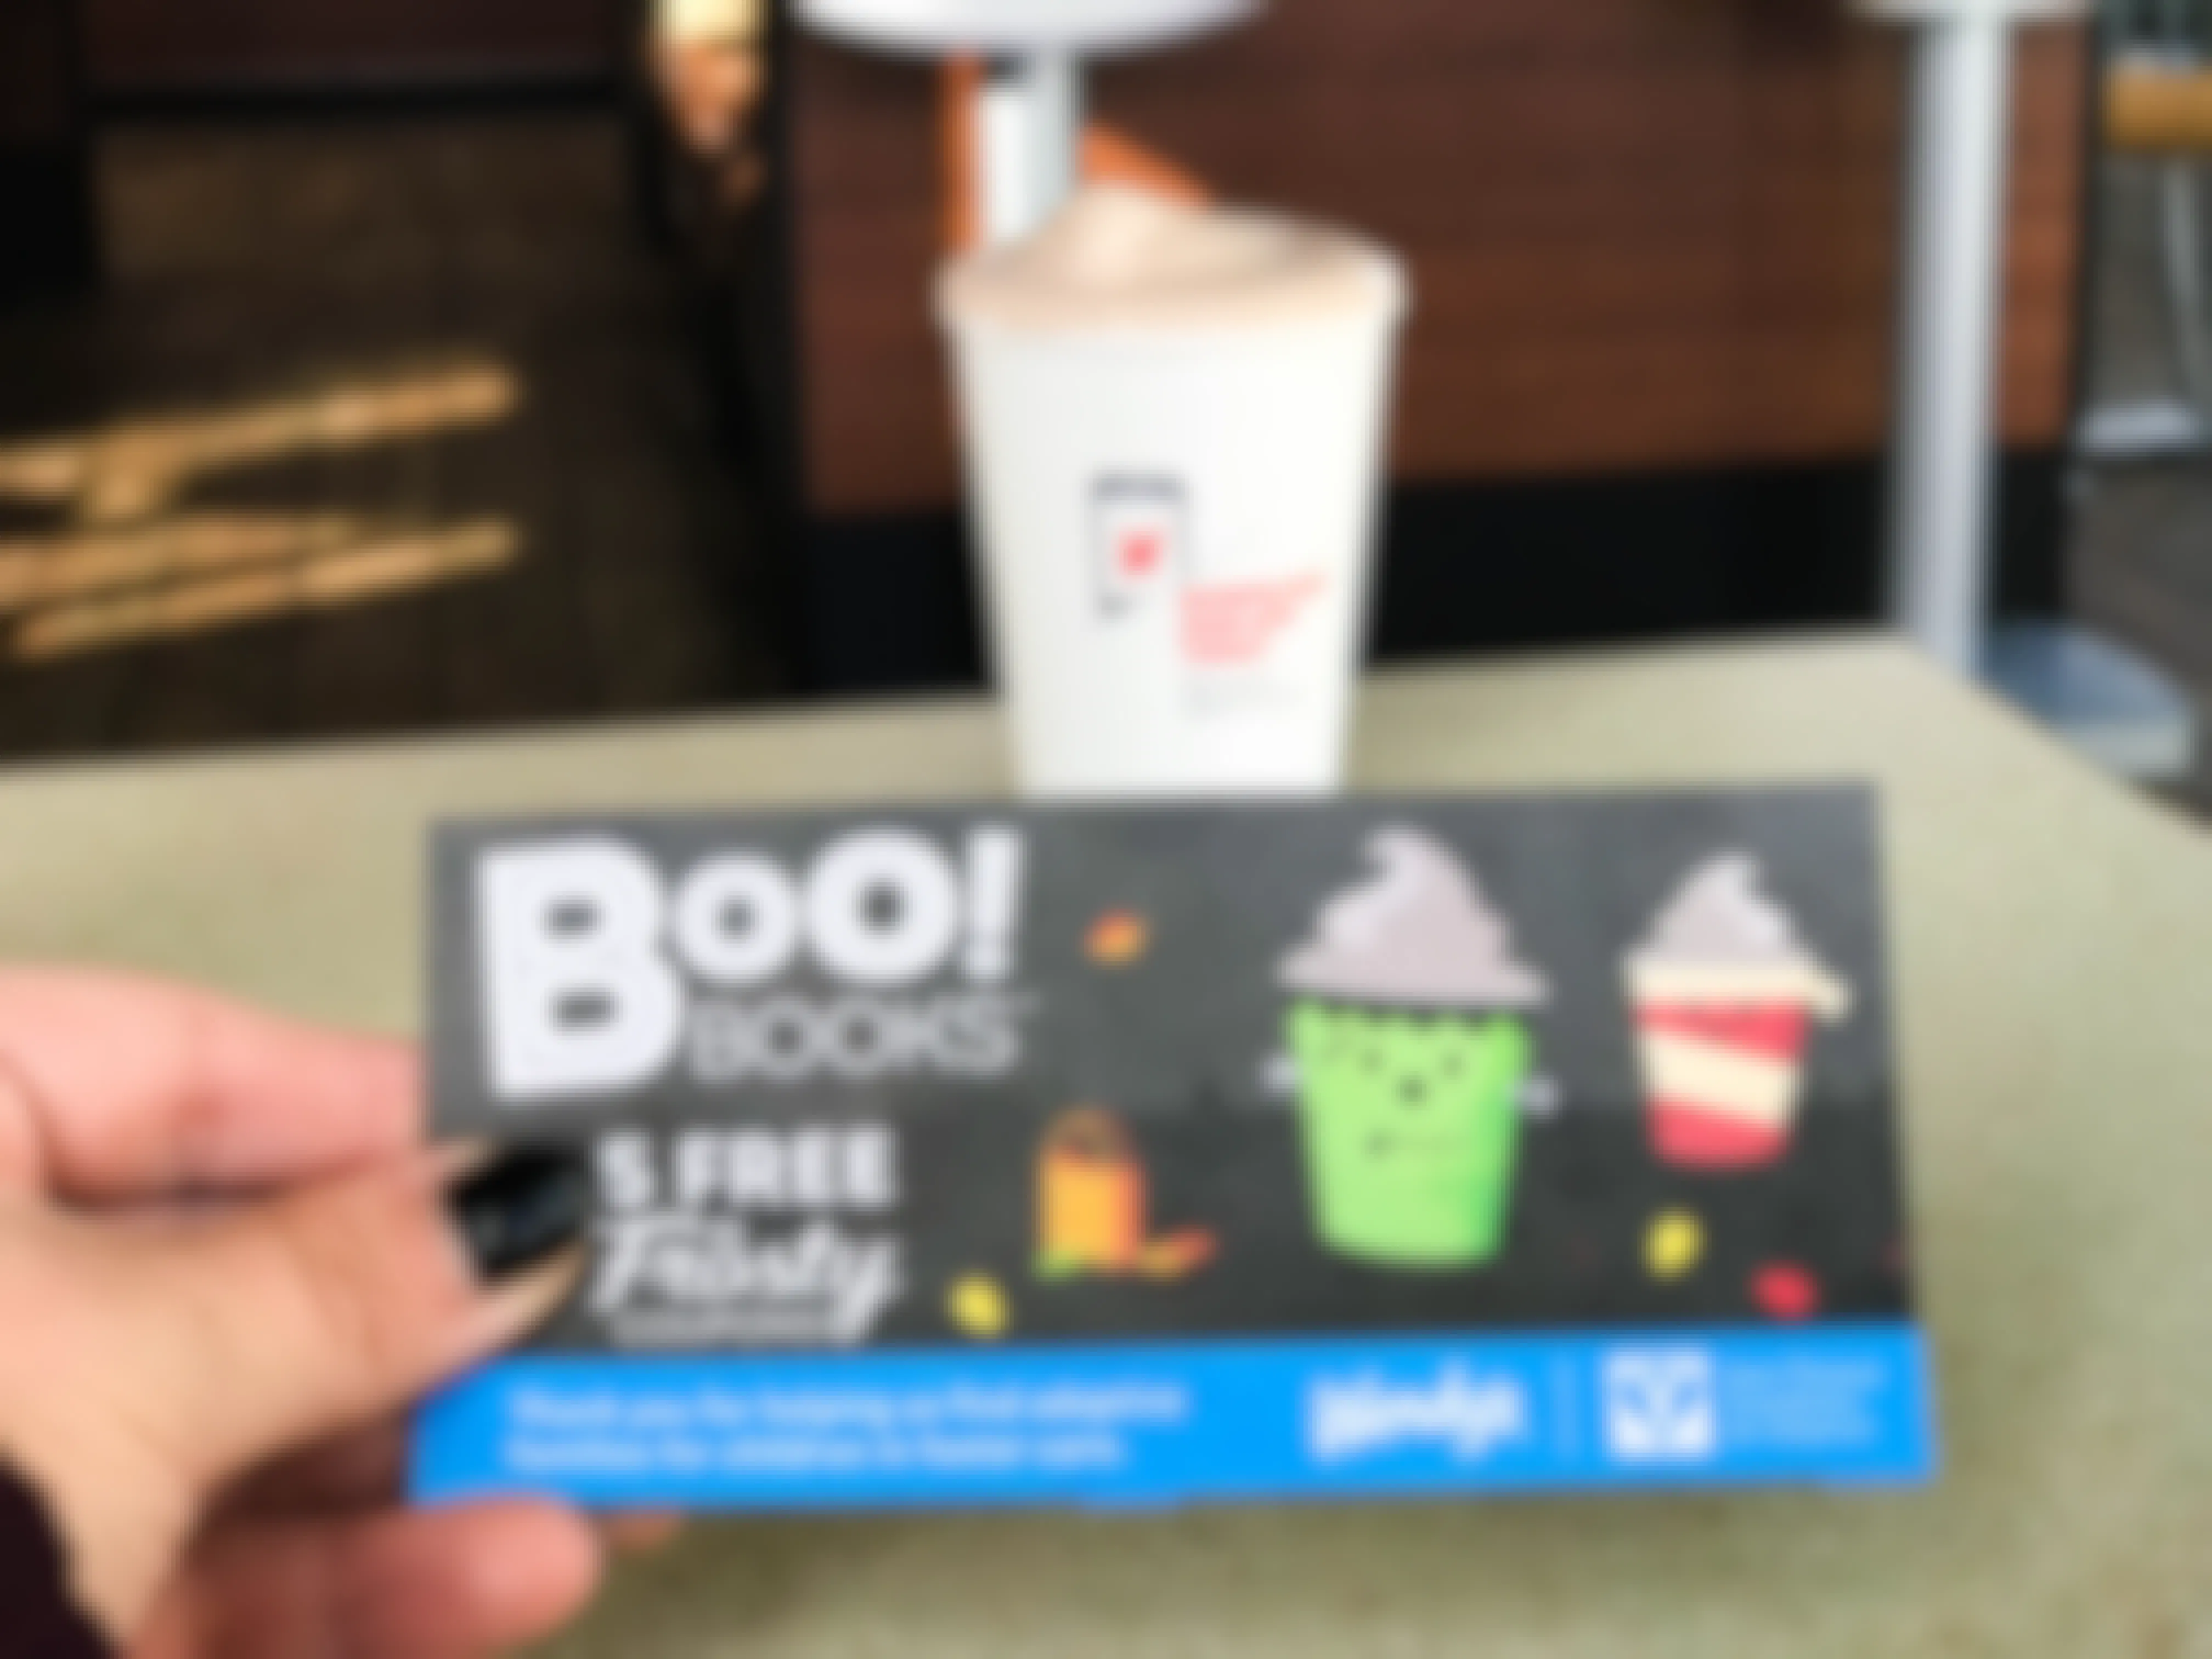 A person's hand holding a card that says, "Boo books 5 free jr frosty coupons" in front of a frosty on a table at Wendy's.